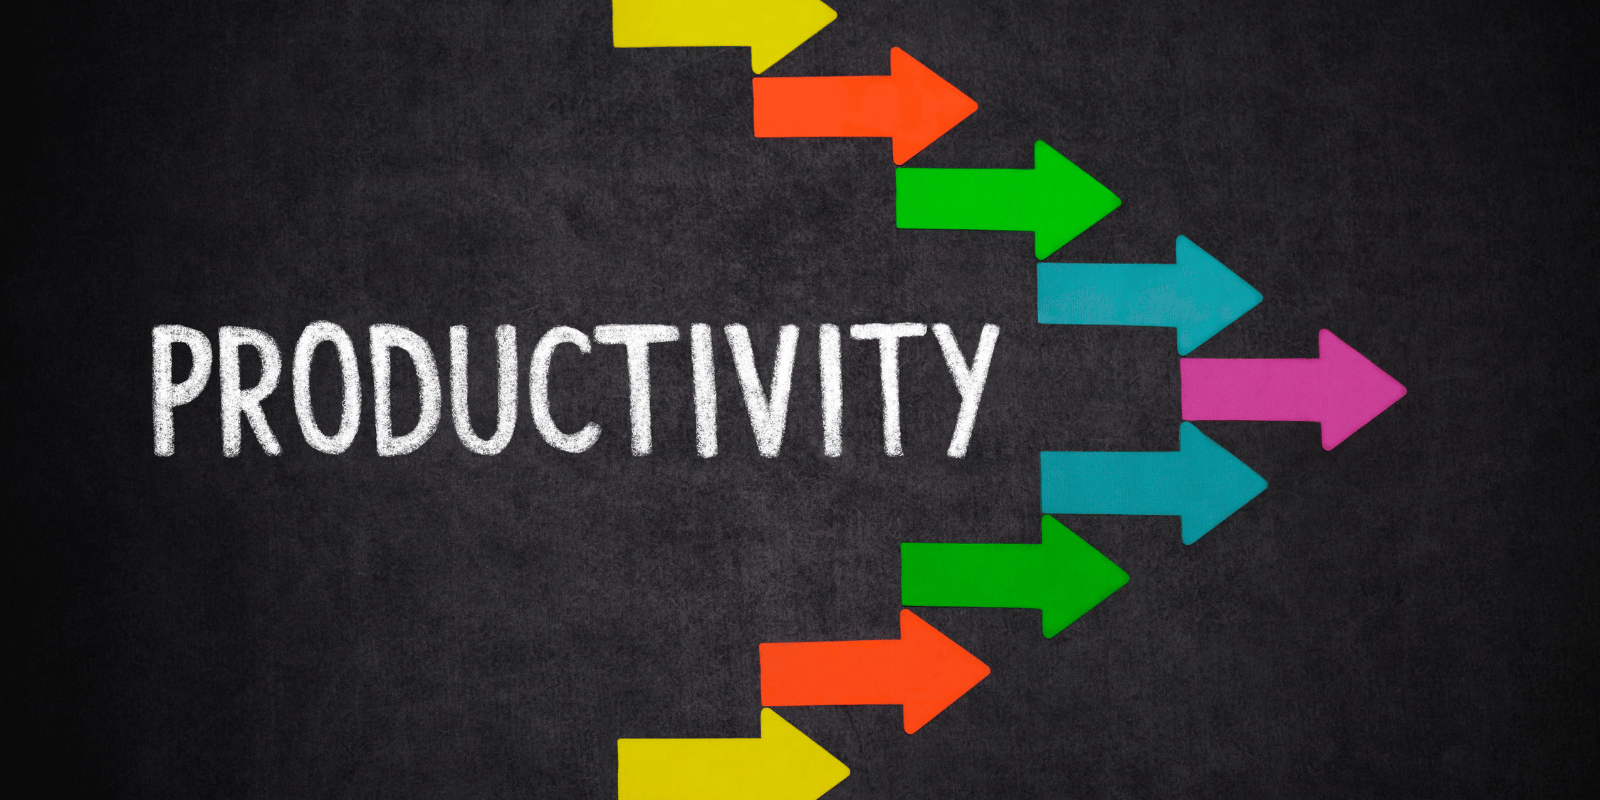 4 Tips to increase workplace productivity